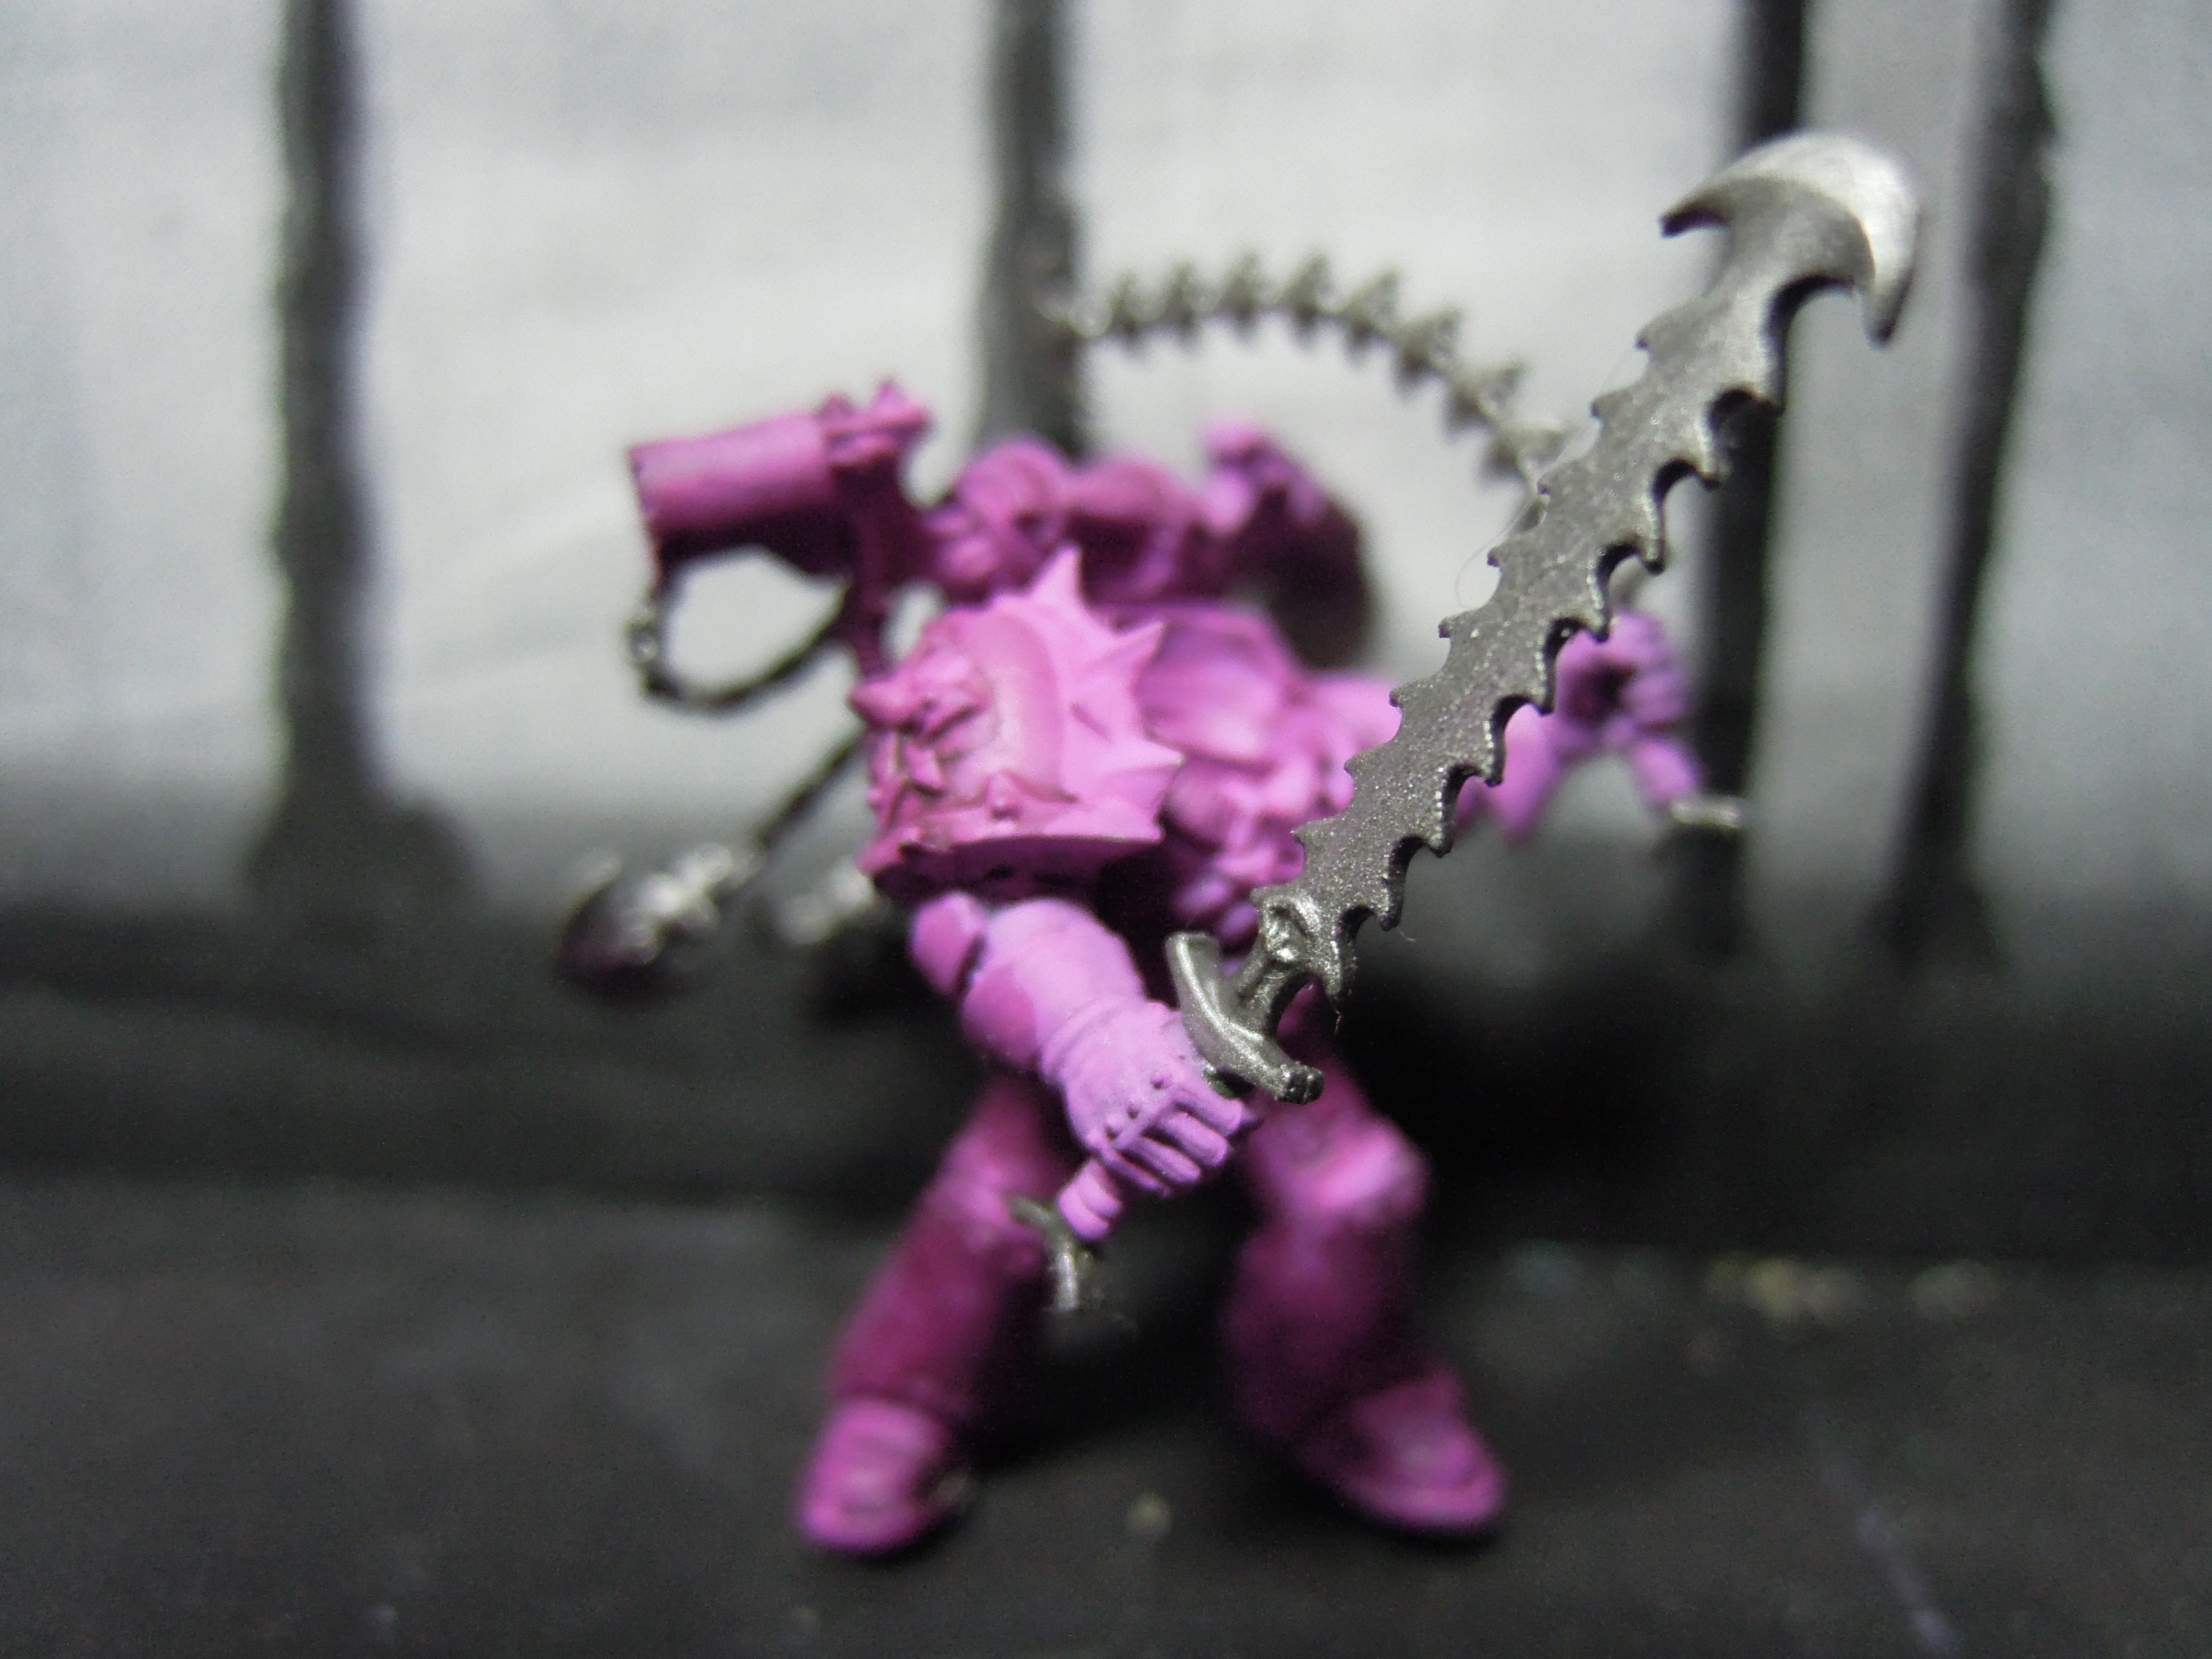 Chain, Chaos, Chaos Space Marines, Conversion, Duelist, Emperor's Children, Heresy, Heretic Astartes, Infantry, Kitbash, Perfection Or Death, Slaanesh, Sword Master, Swords, Traitor Legions, Warhammer 40,000, Work In Progress